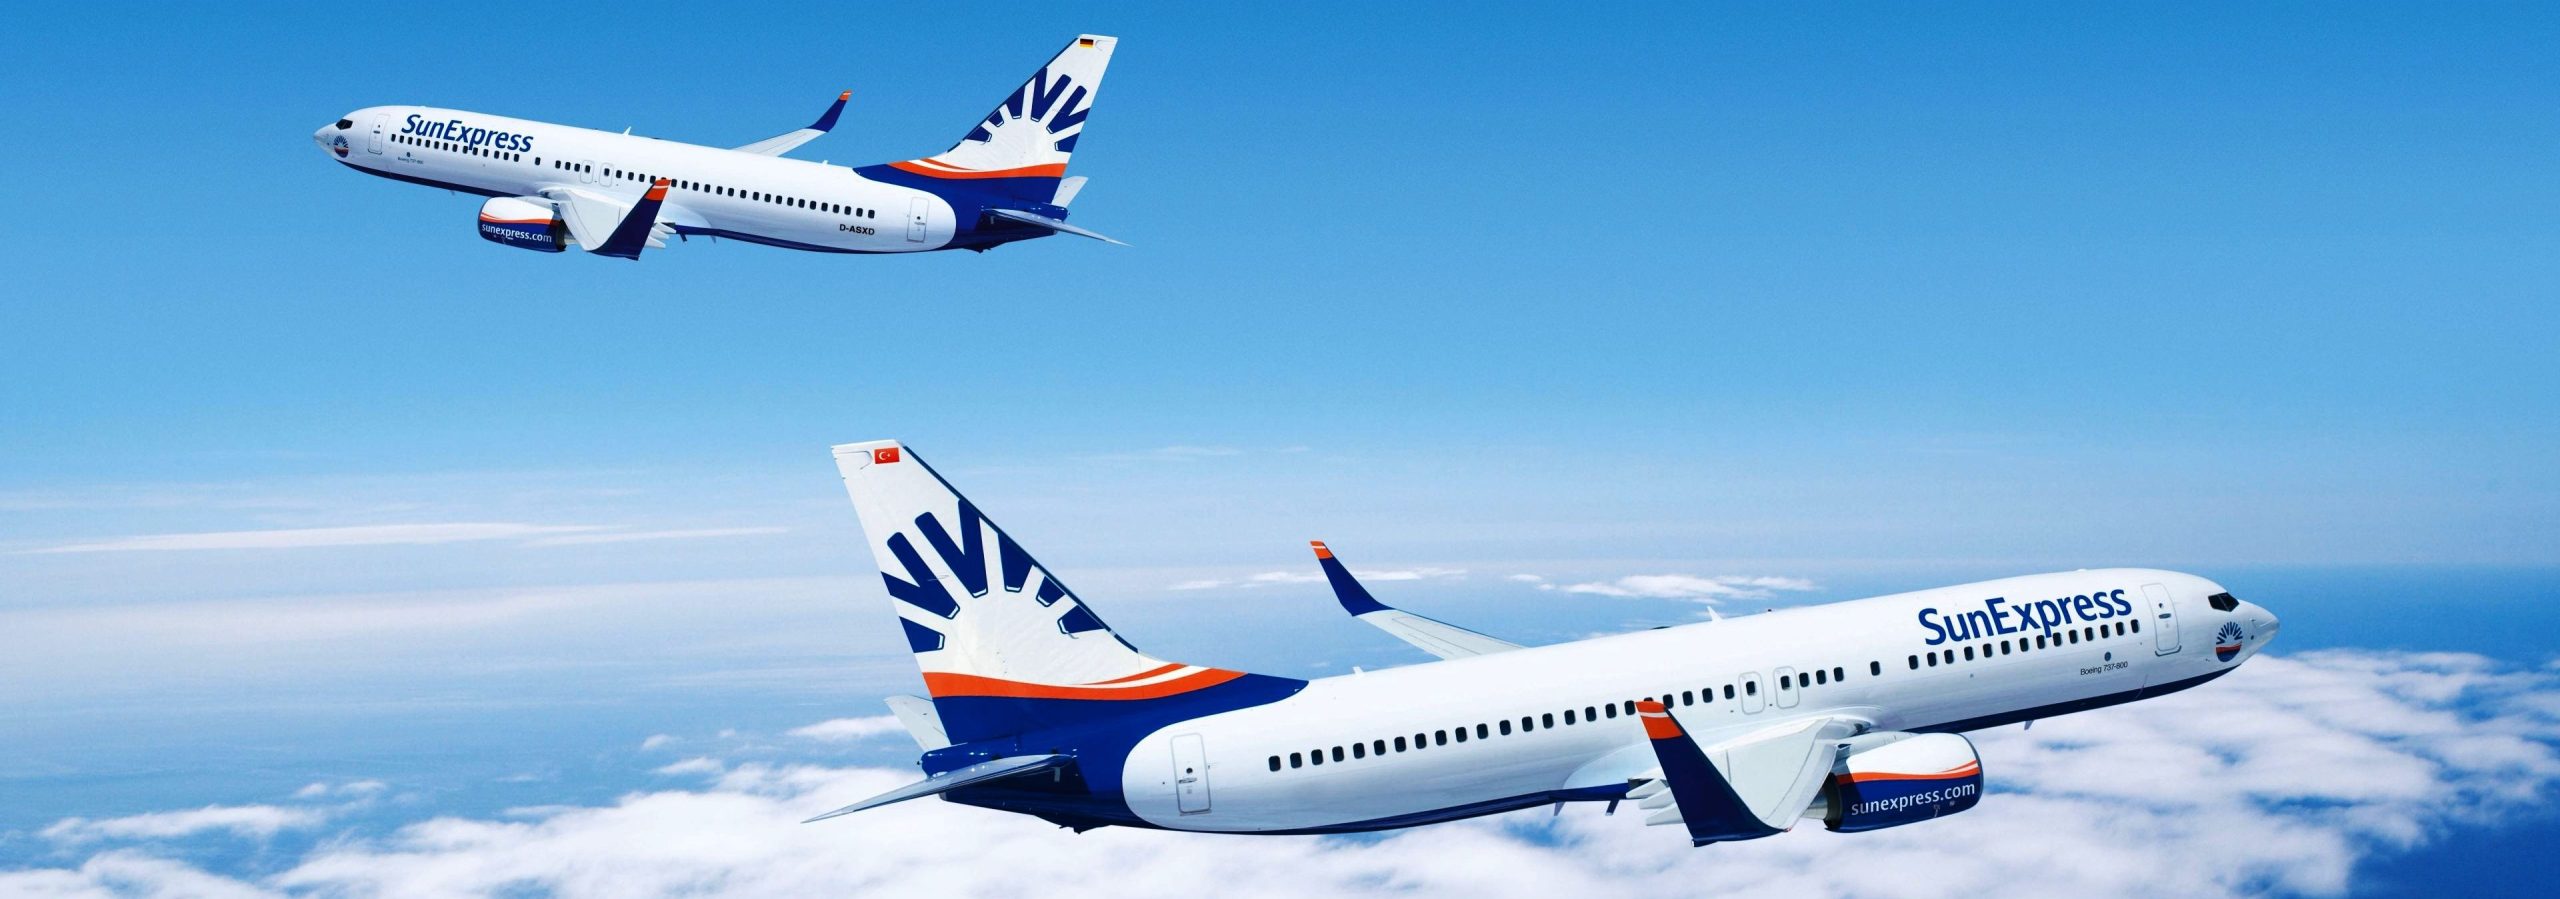 Sunexpress Airlines Contact Number